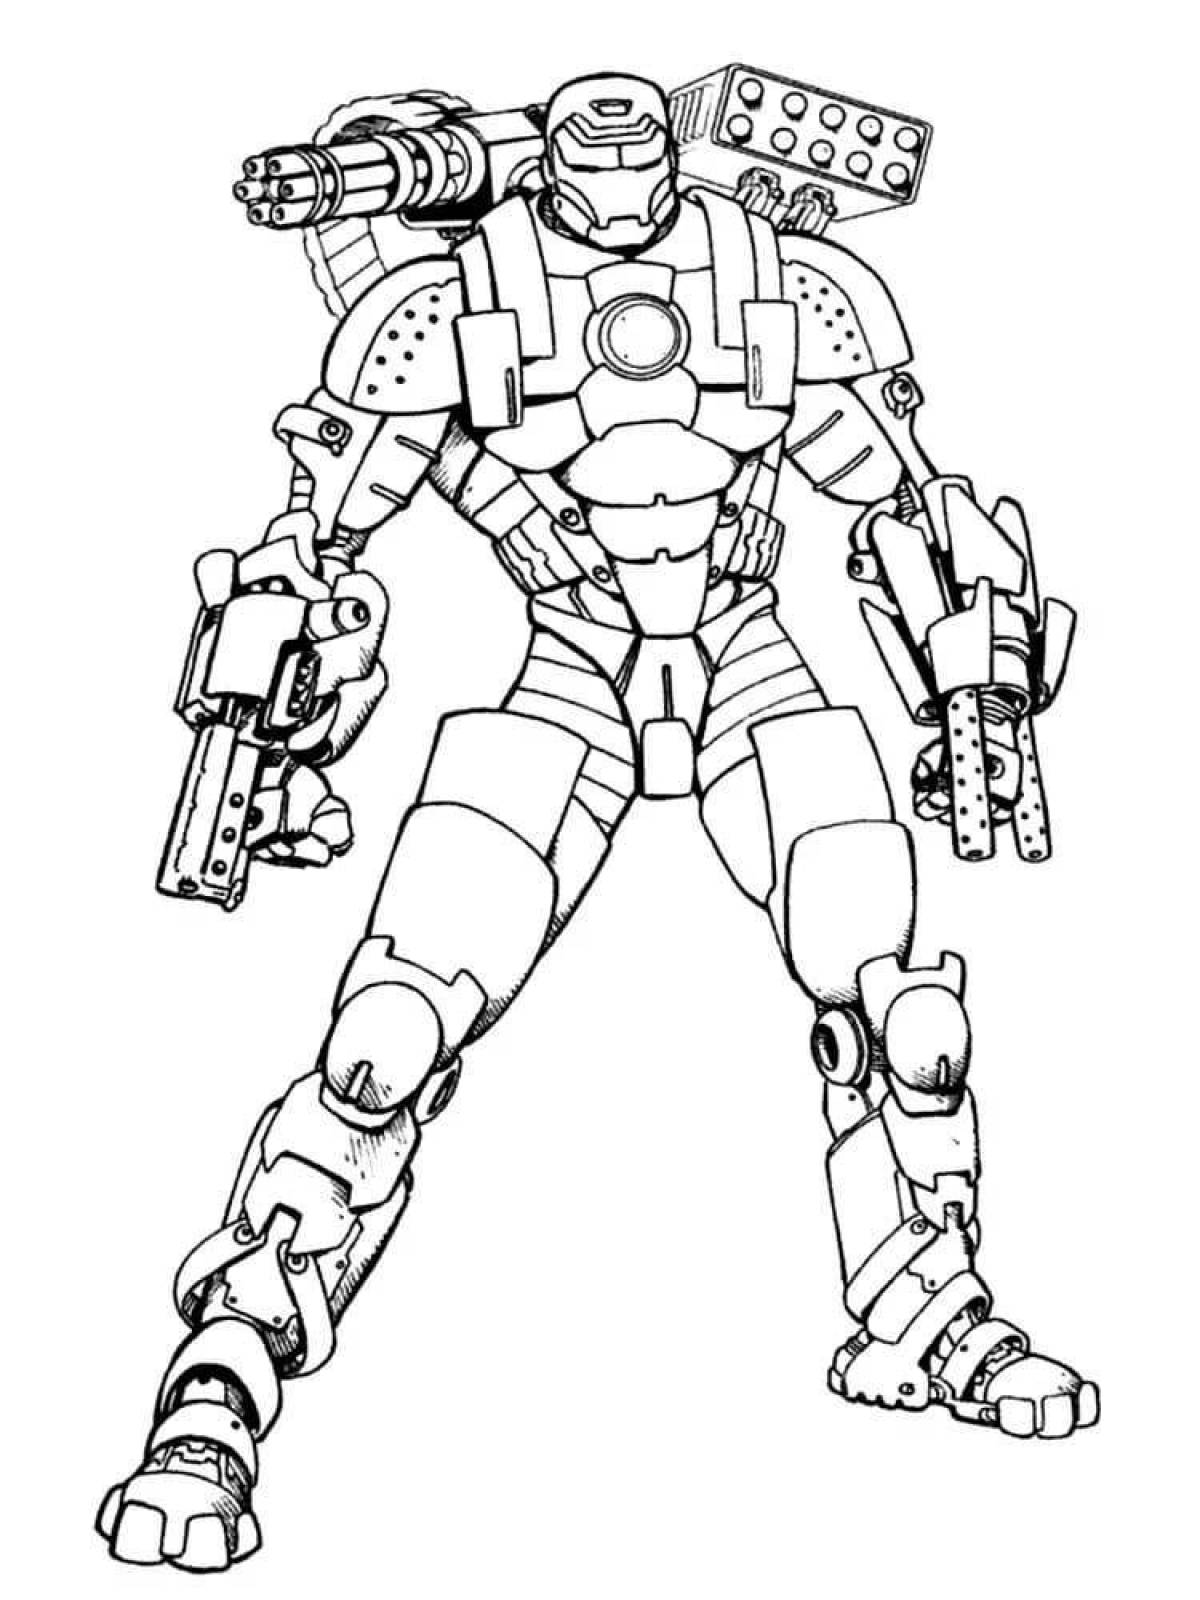 Majestic iron patriot coloring page